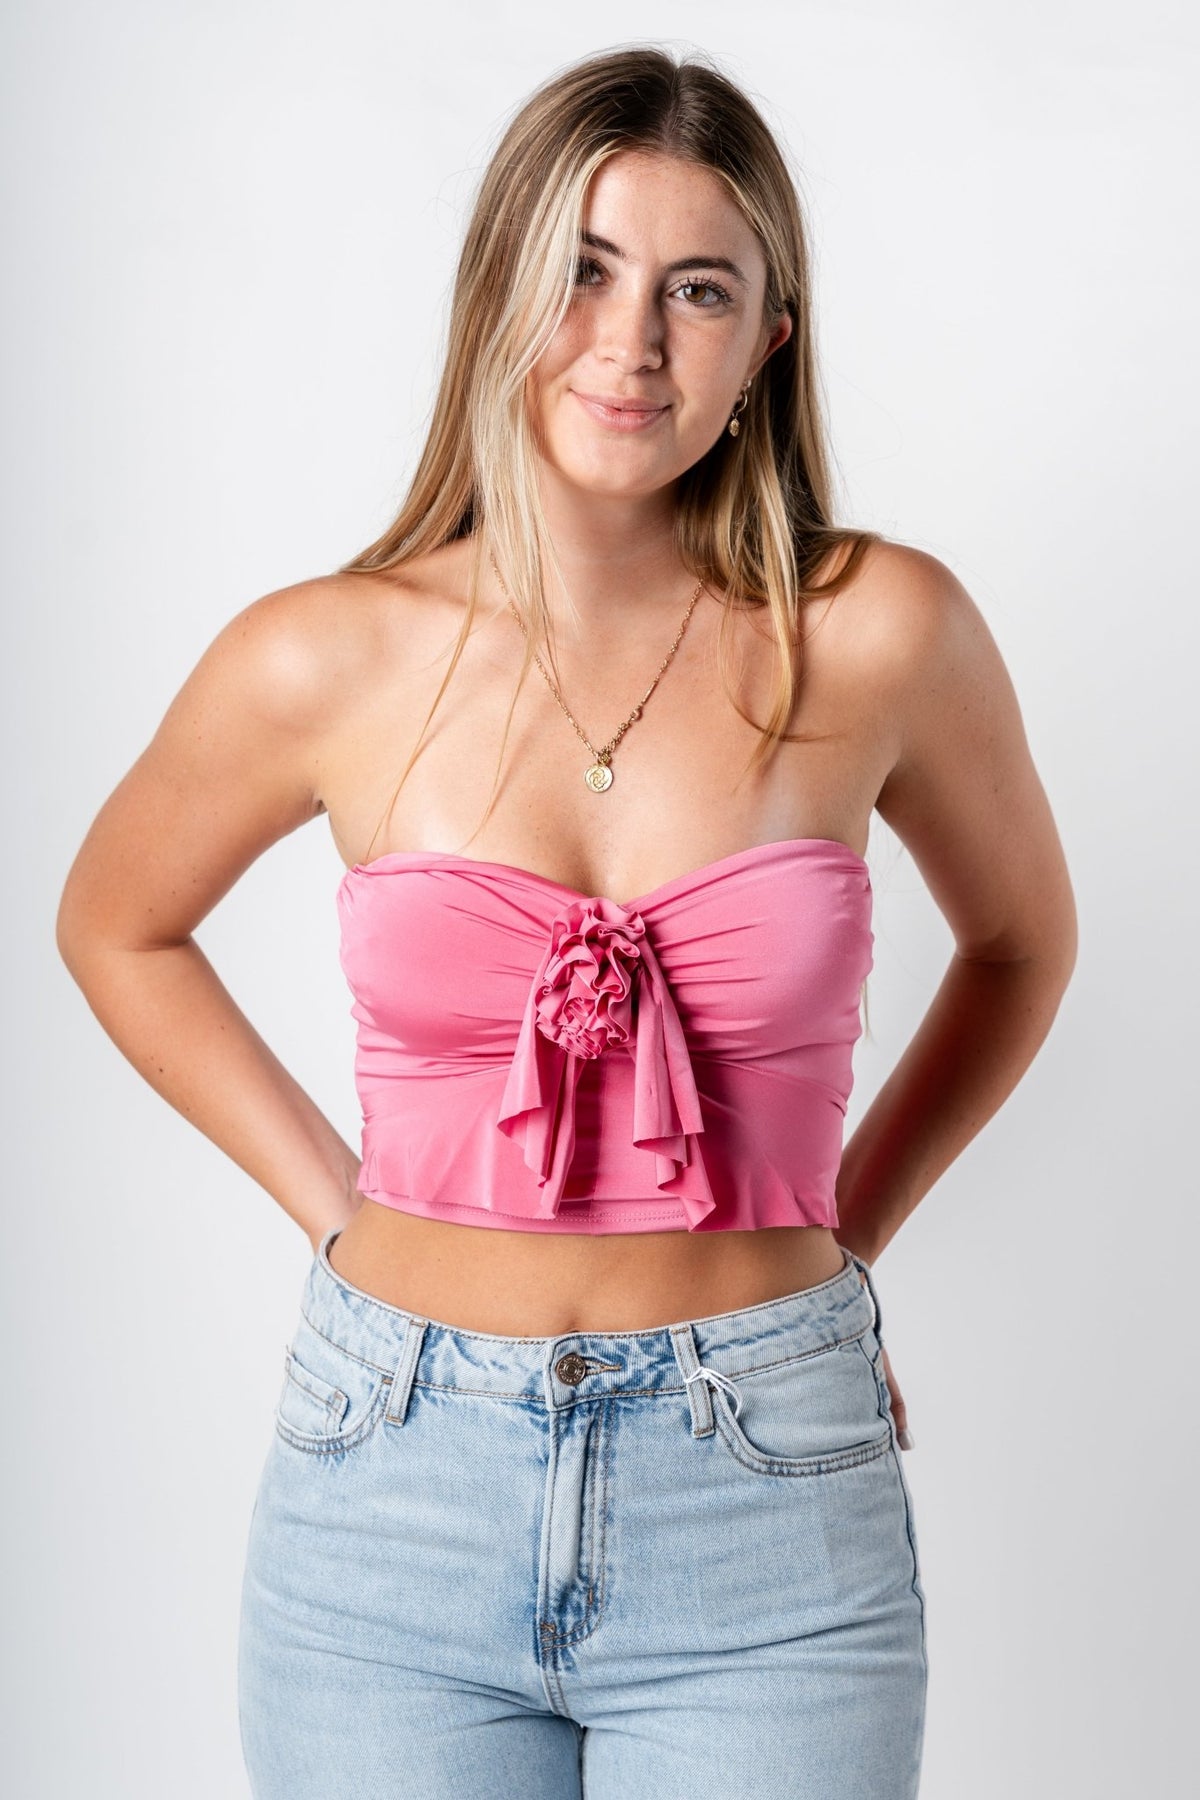 Rosette ruffle tube top candy pink - Trendy T-Shirts for Valentine's Day at Lush Fashion Lounge Boutique in Oklahoma City